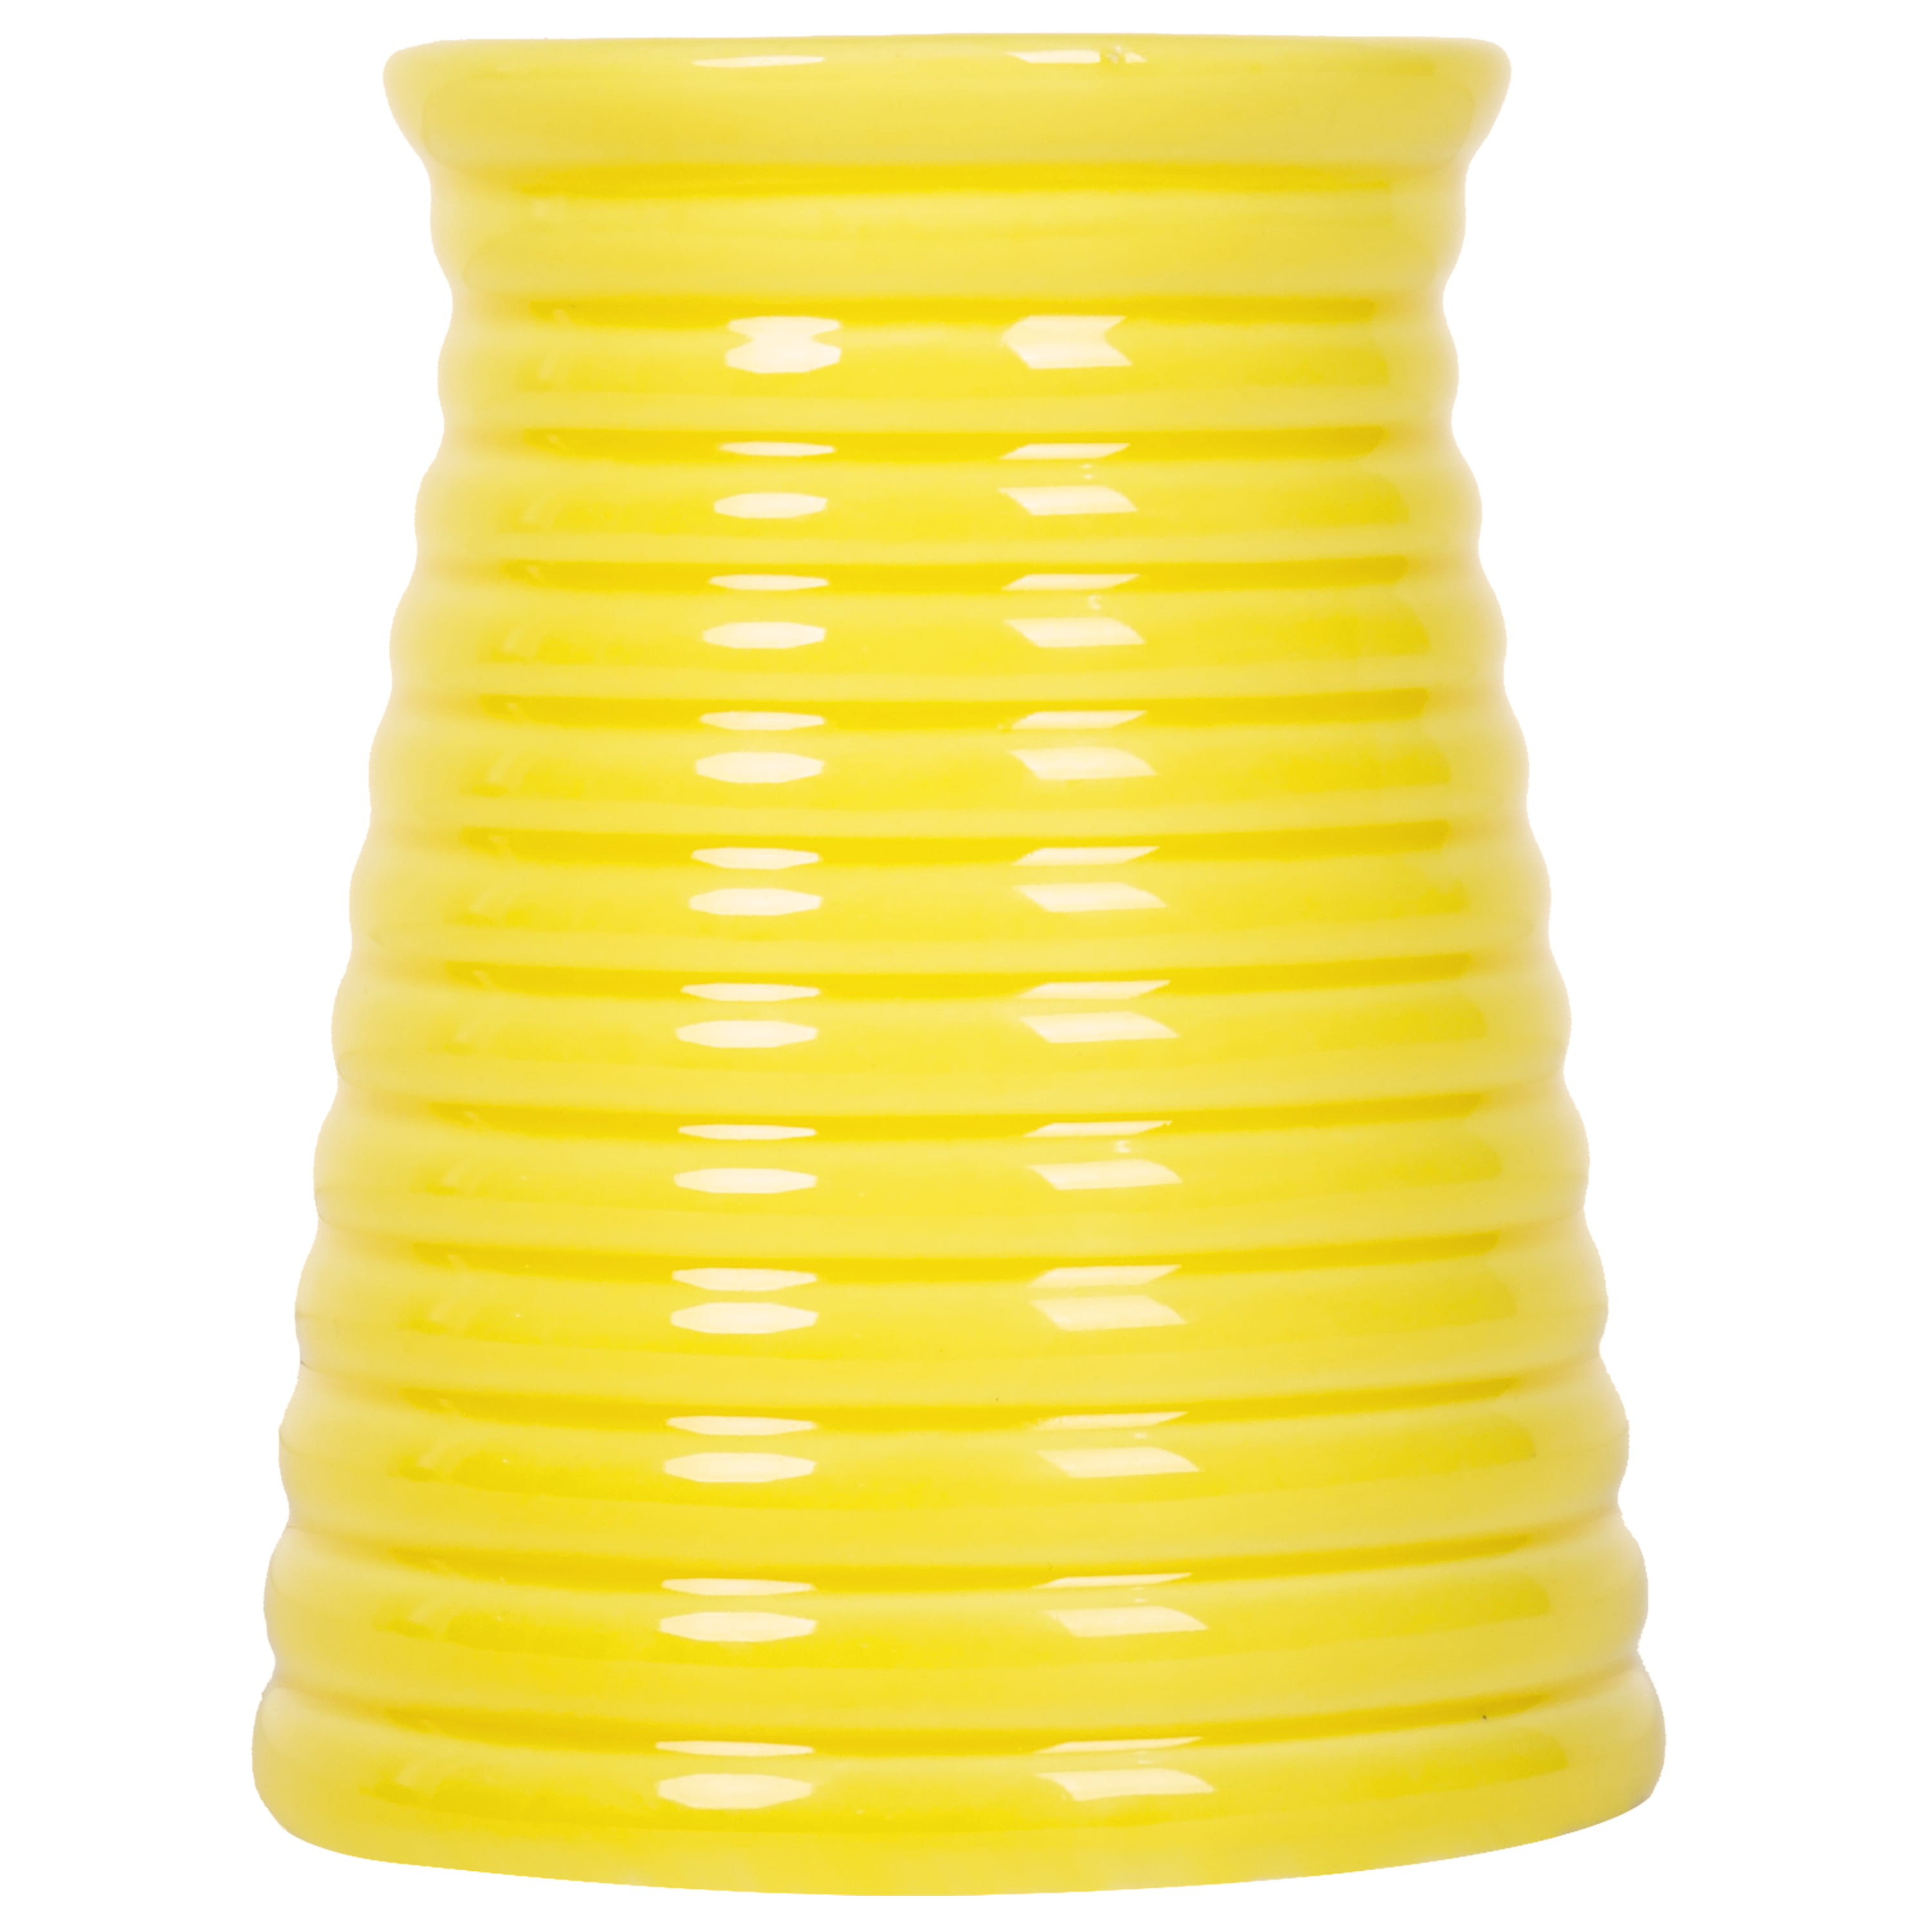 Flower Pot Ribbed Design Small Yellow Ceramic Tabletop Centerpiece Vase 